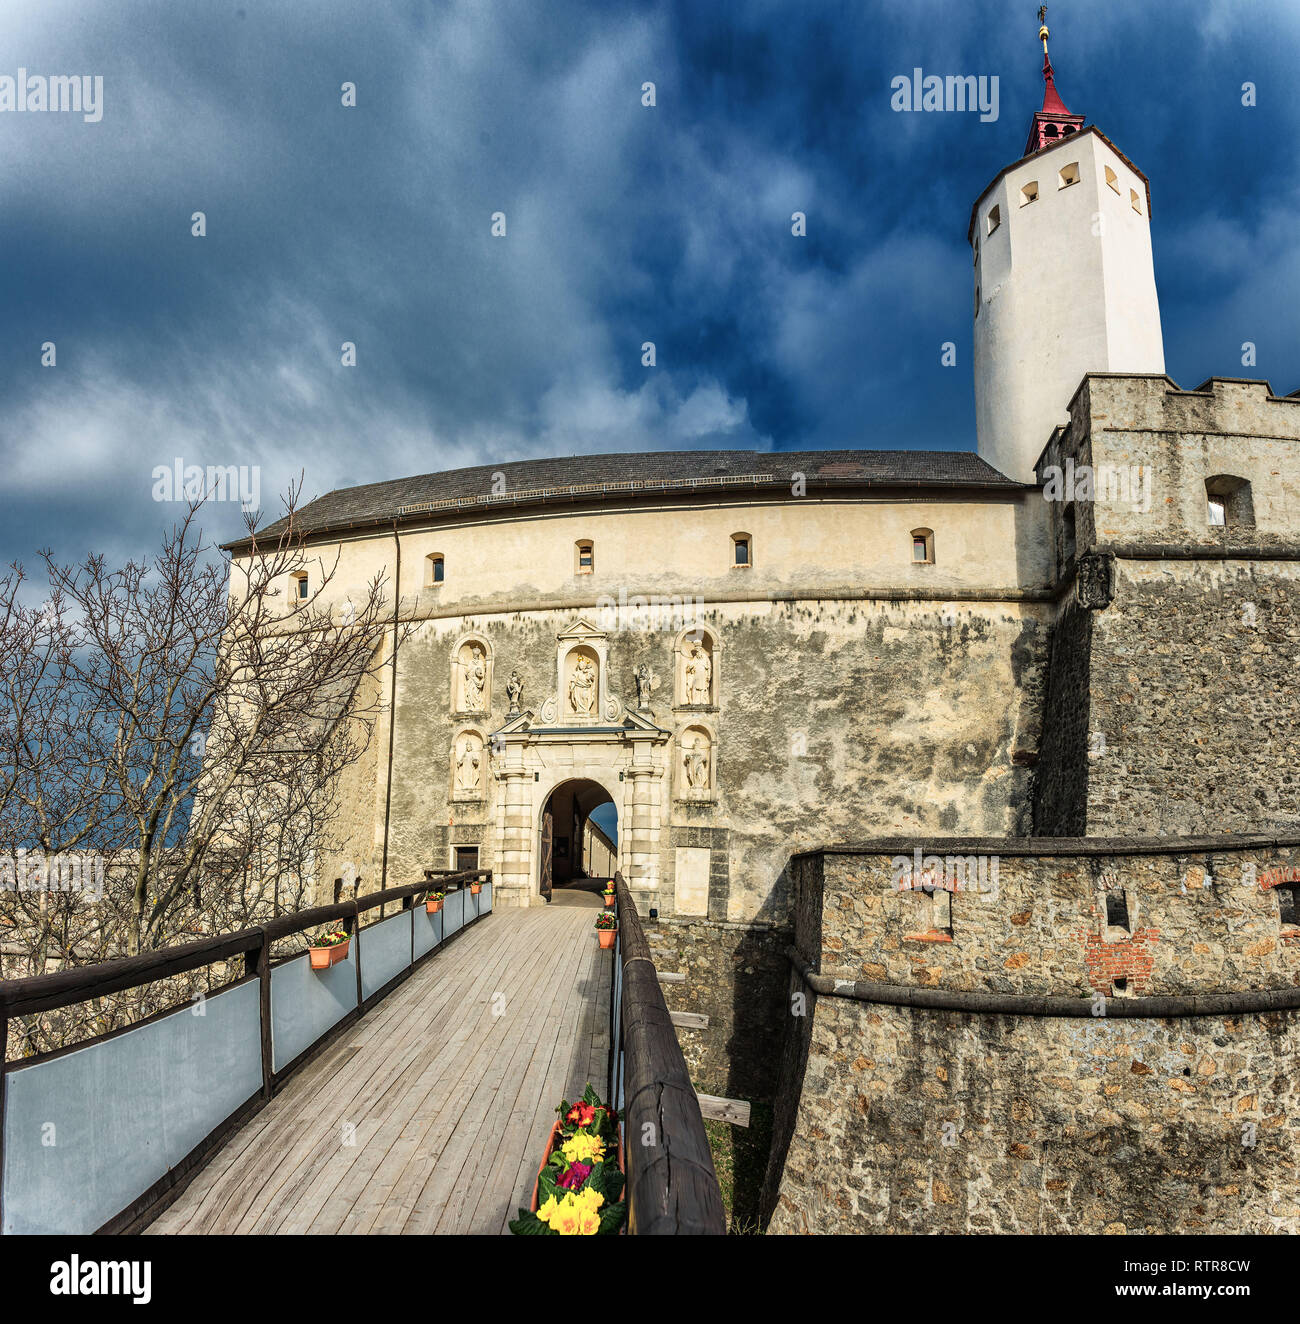 Forchtenstein Castle - a medieval castle from the 15th century located in the Rosalia mountains in Burgenland, Austria Stock Photo